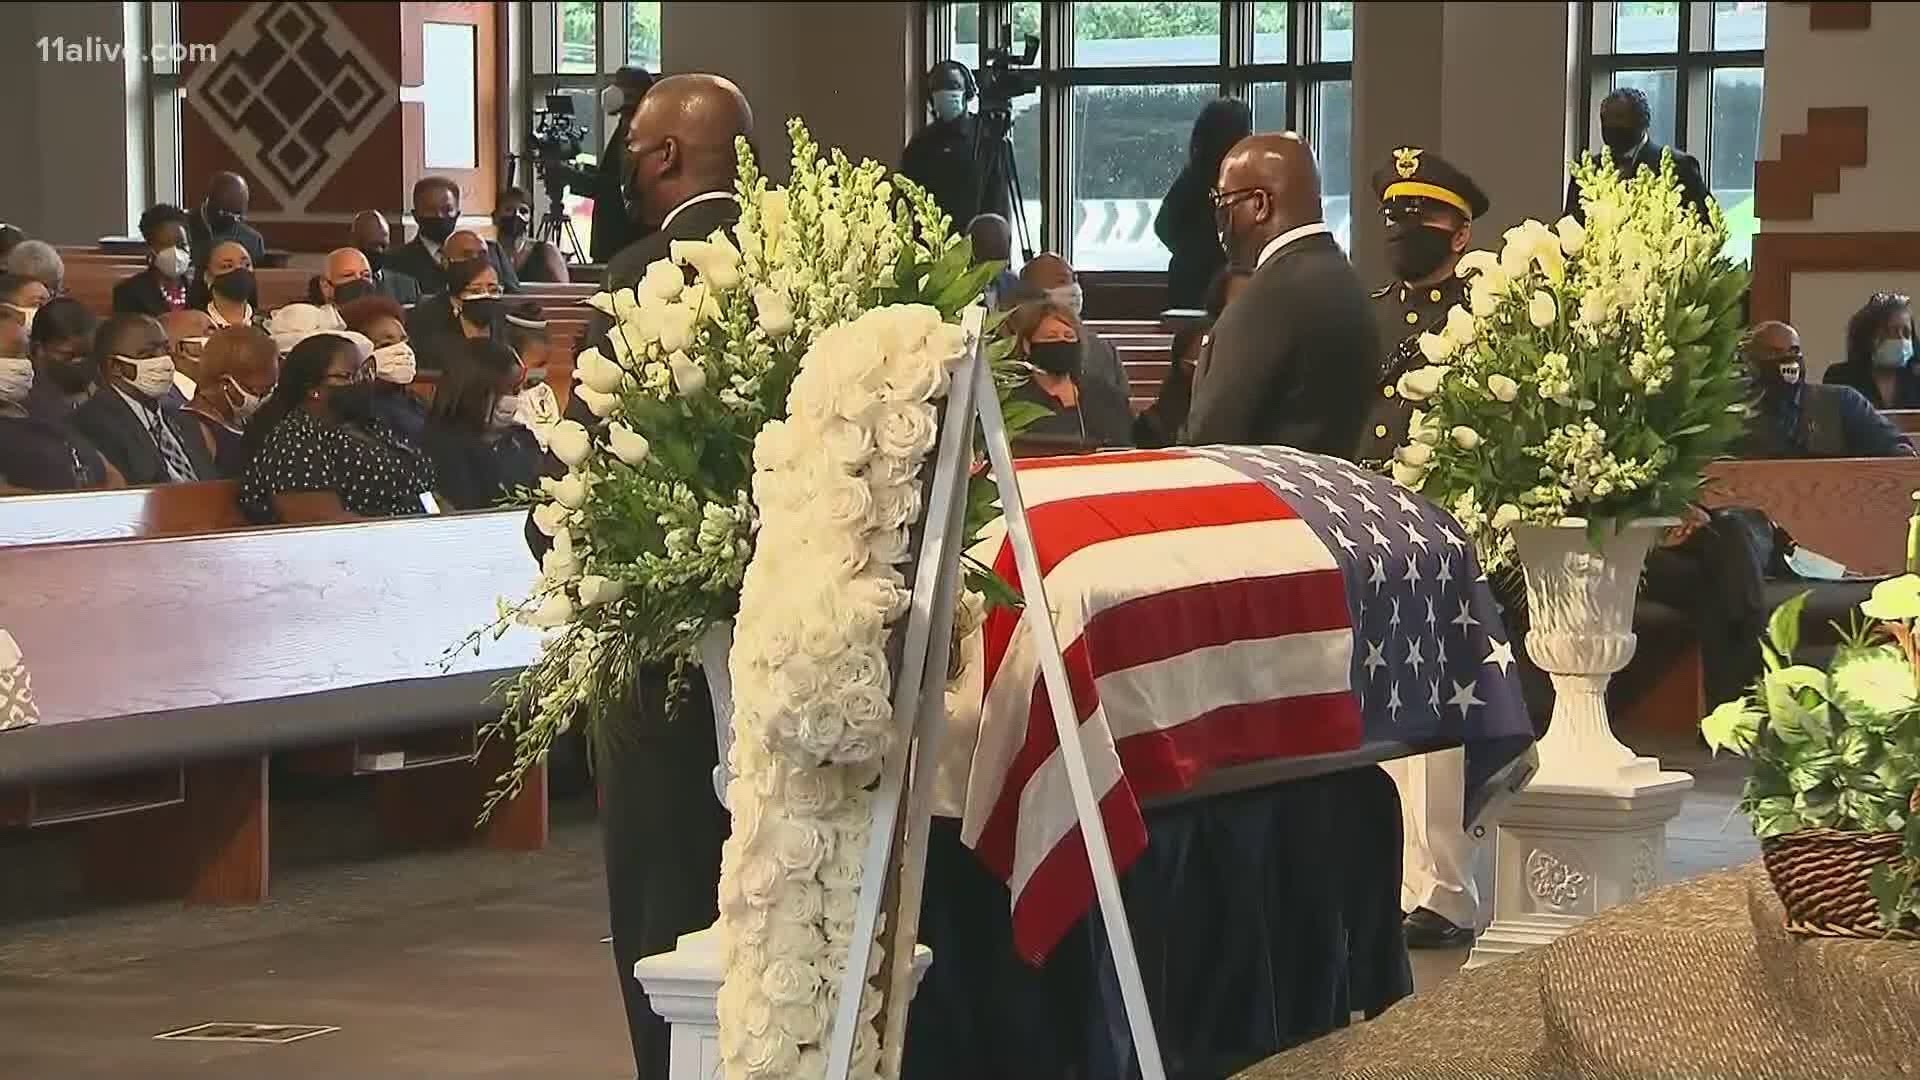 The private funeral was held for the Civil Rights icon and longtime congressman yesterday in Atlanta.